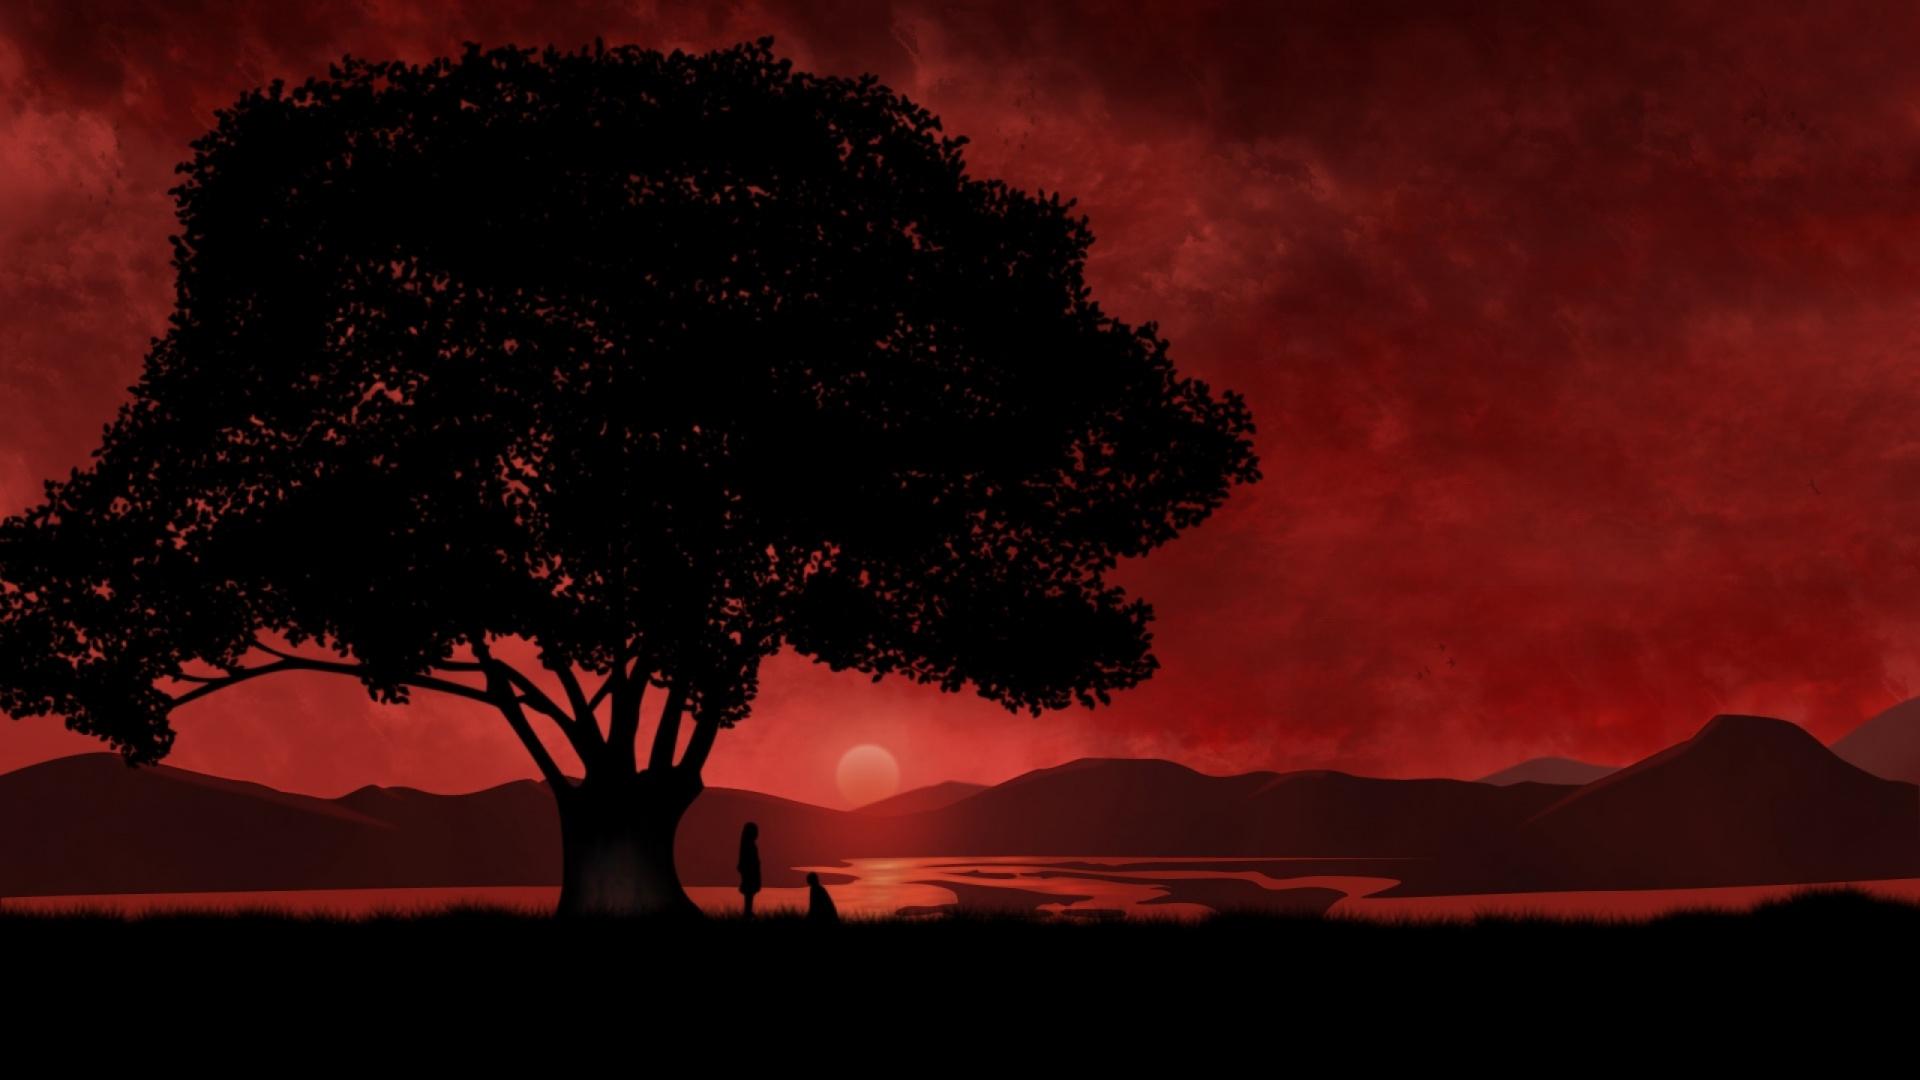 1920x1080 Anime Red Sunset & Tree desktop PC and Mac wallpapers